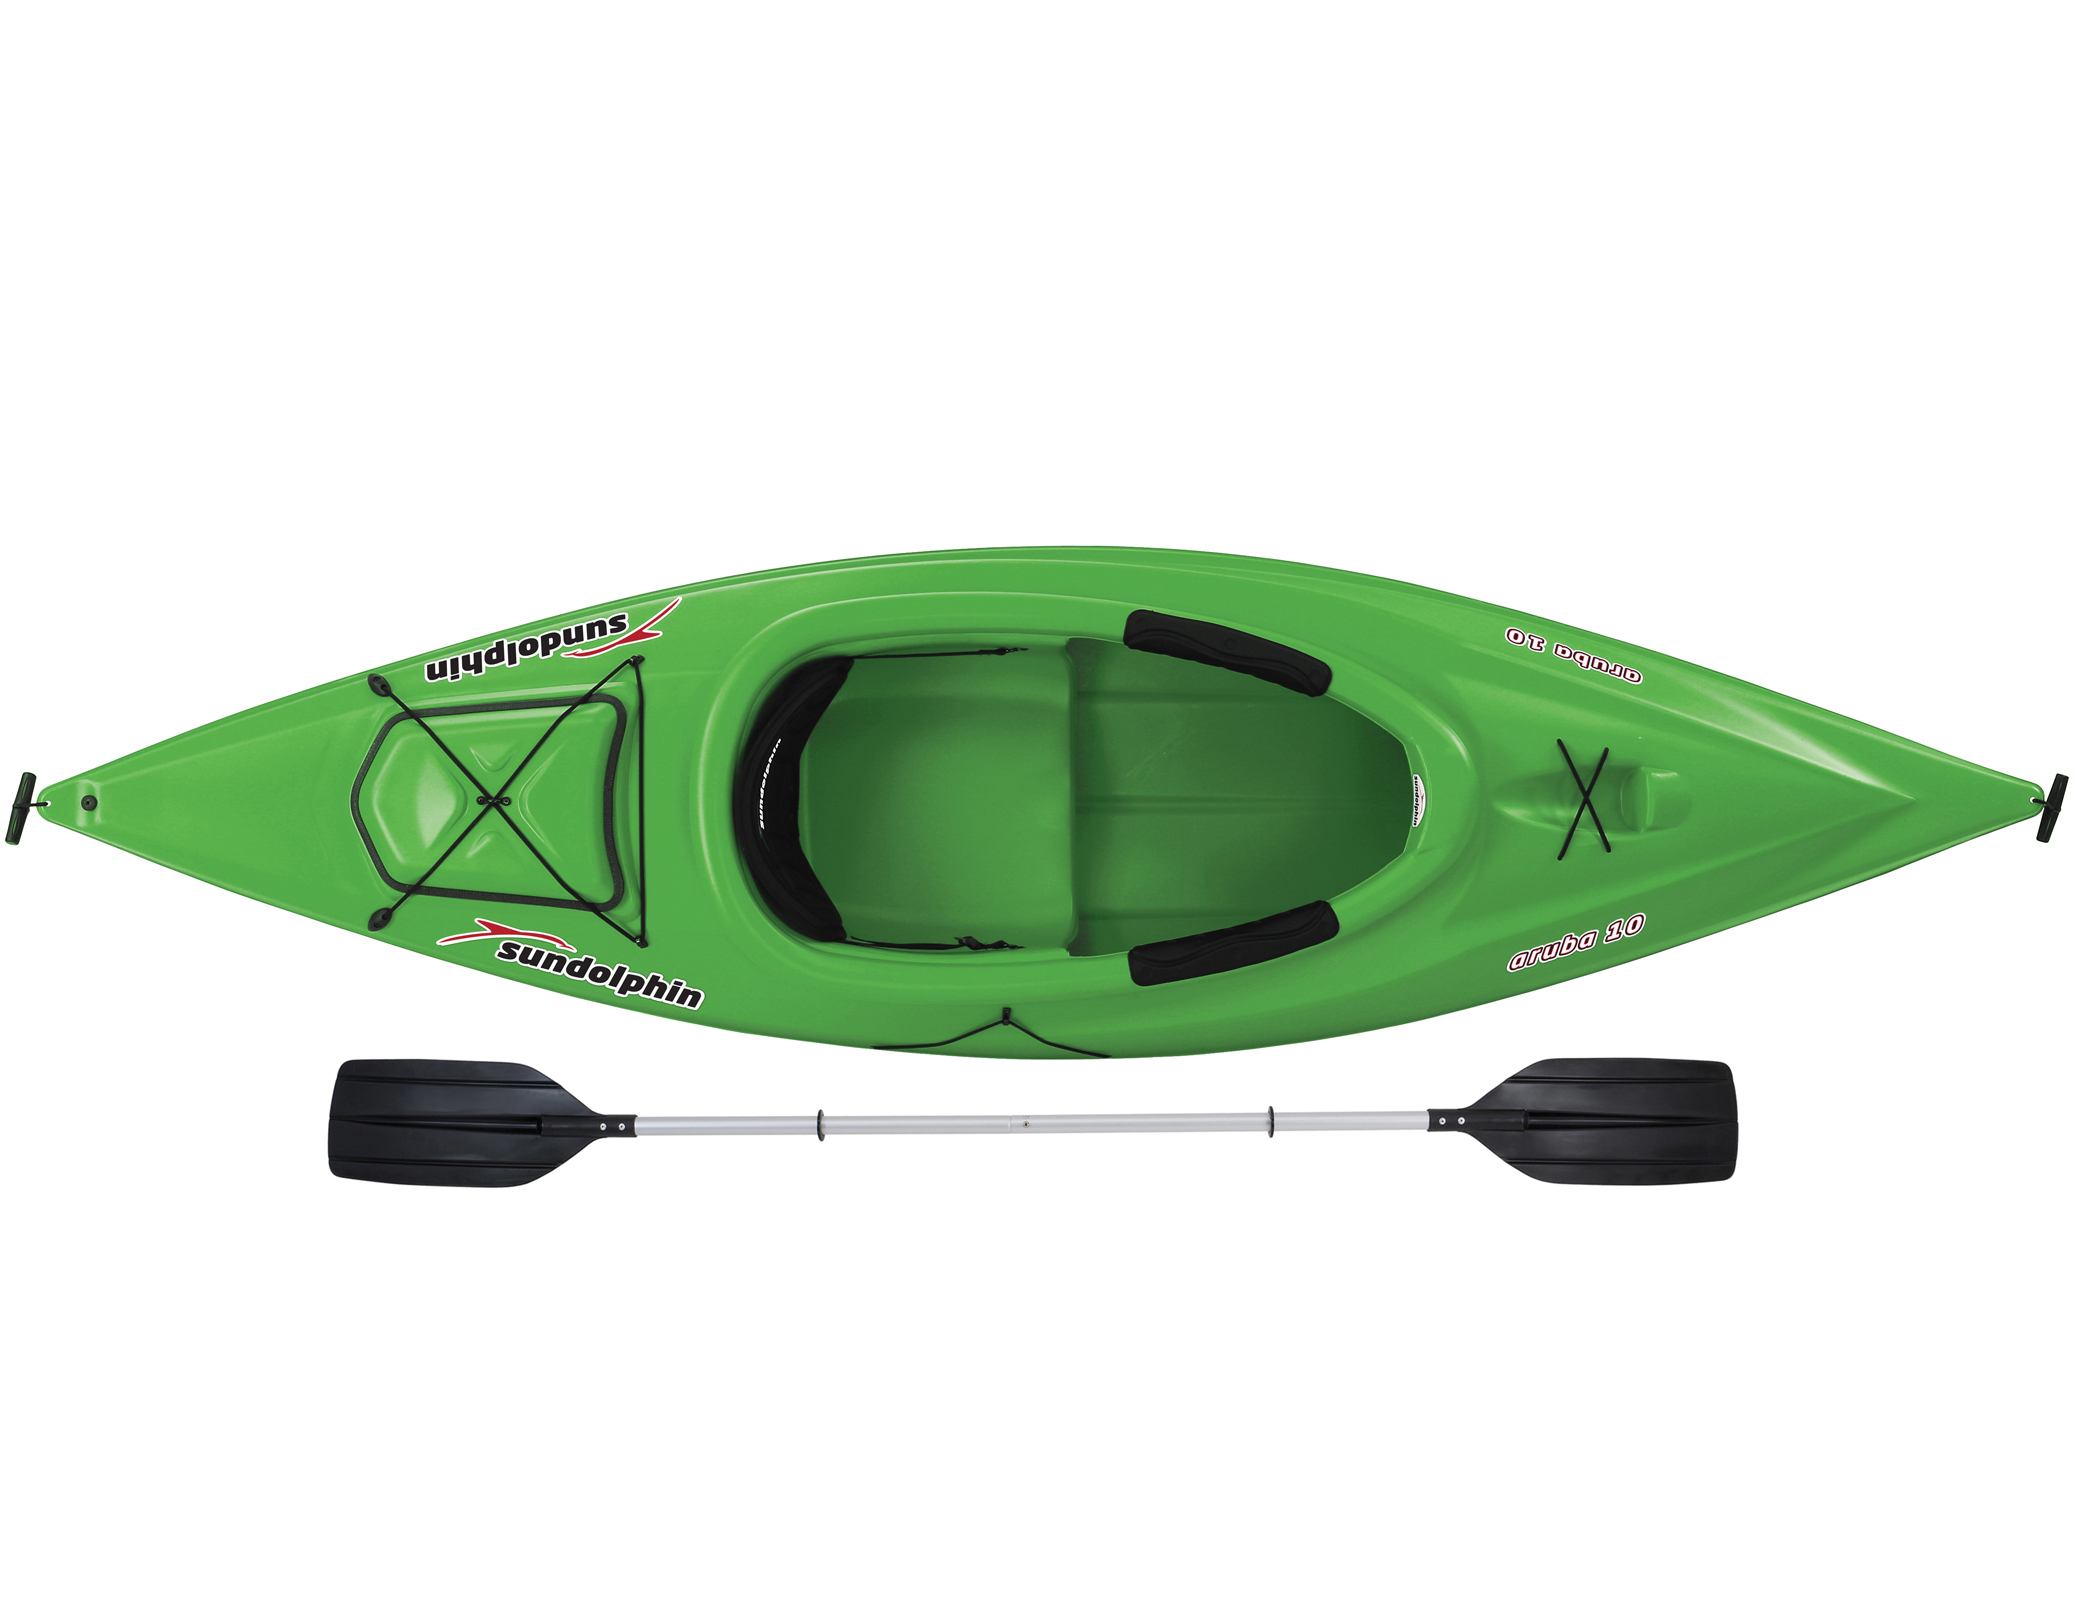 Sun Dolphin Aruba 10' Sit-in Kayak Lime, Paddle Included - image 4 of 5